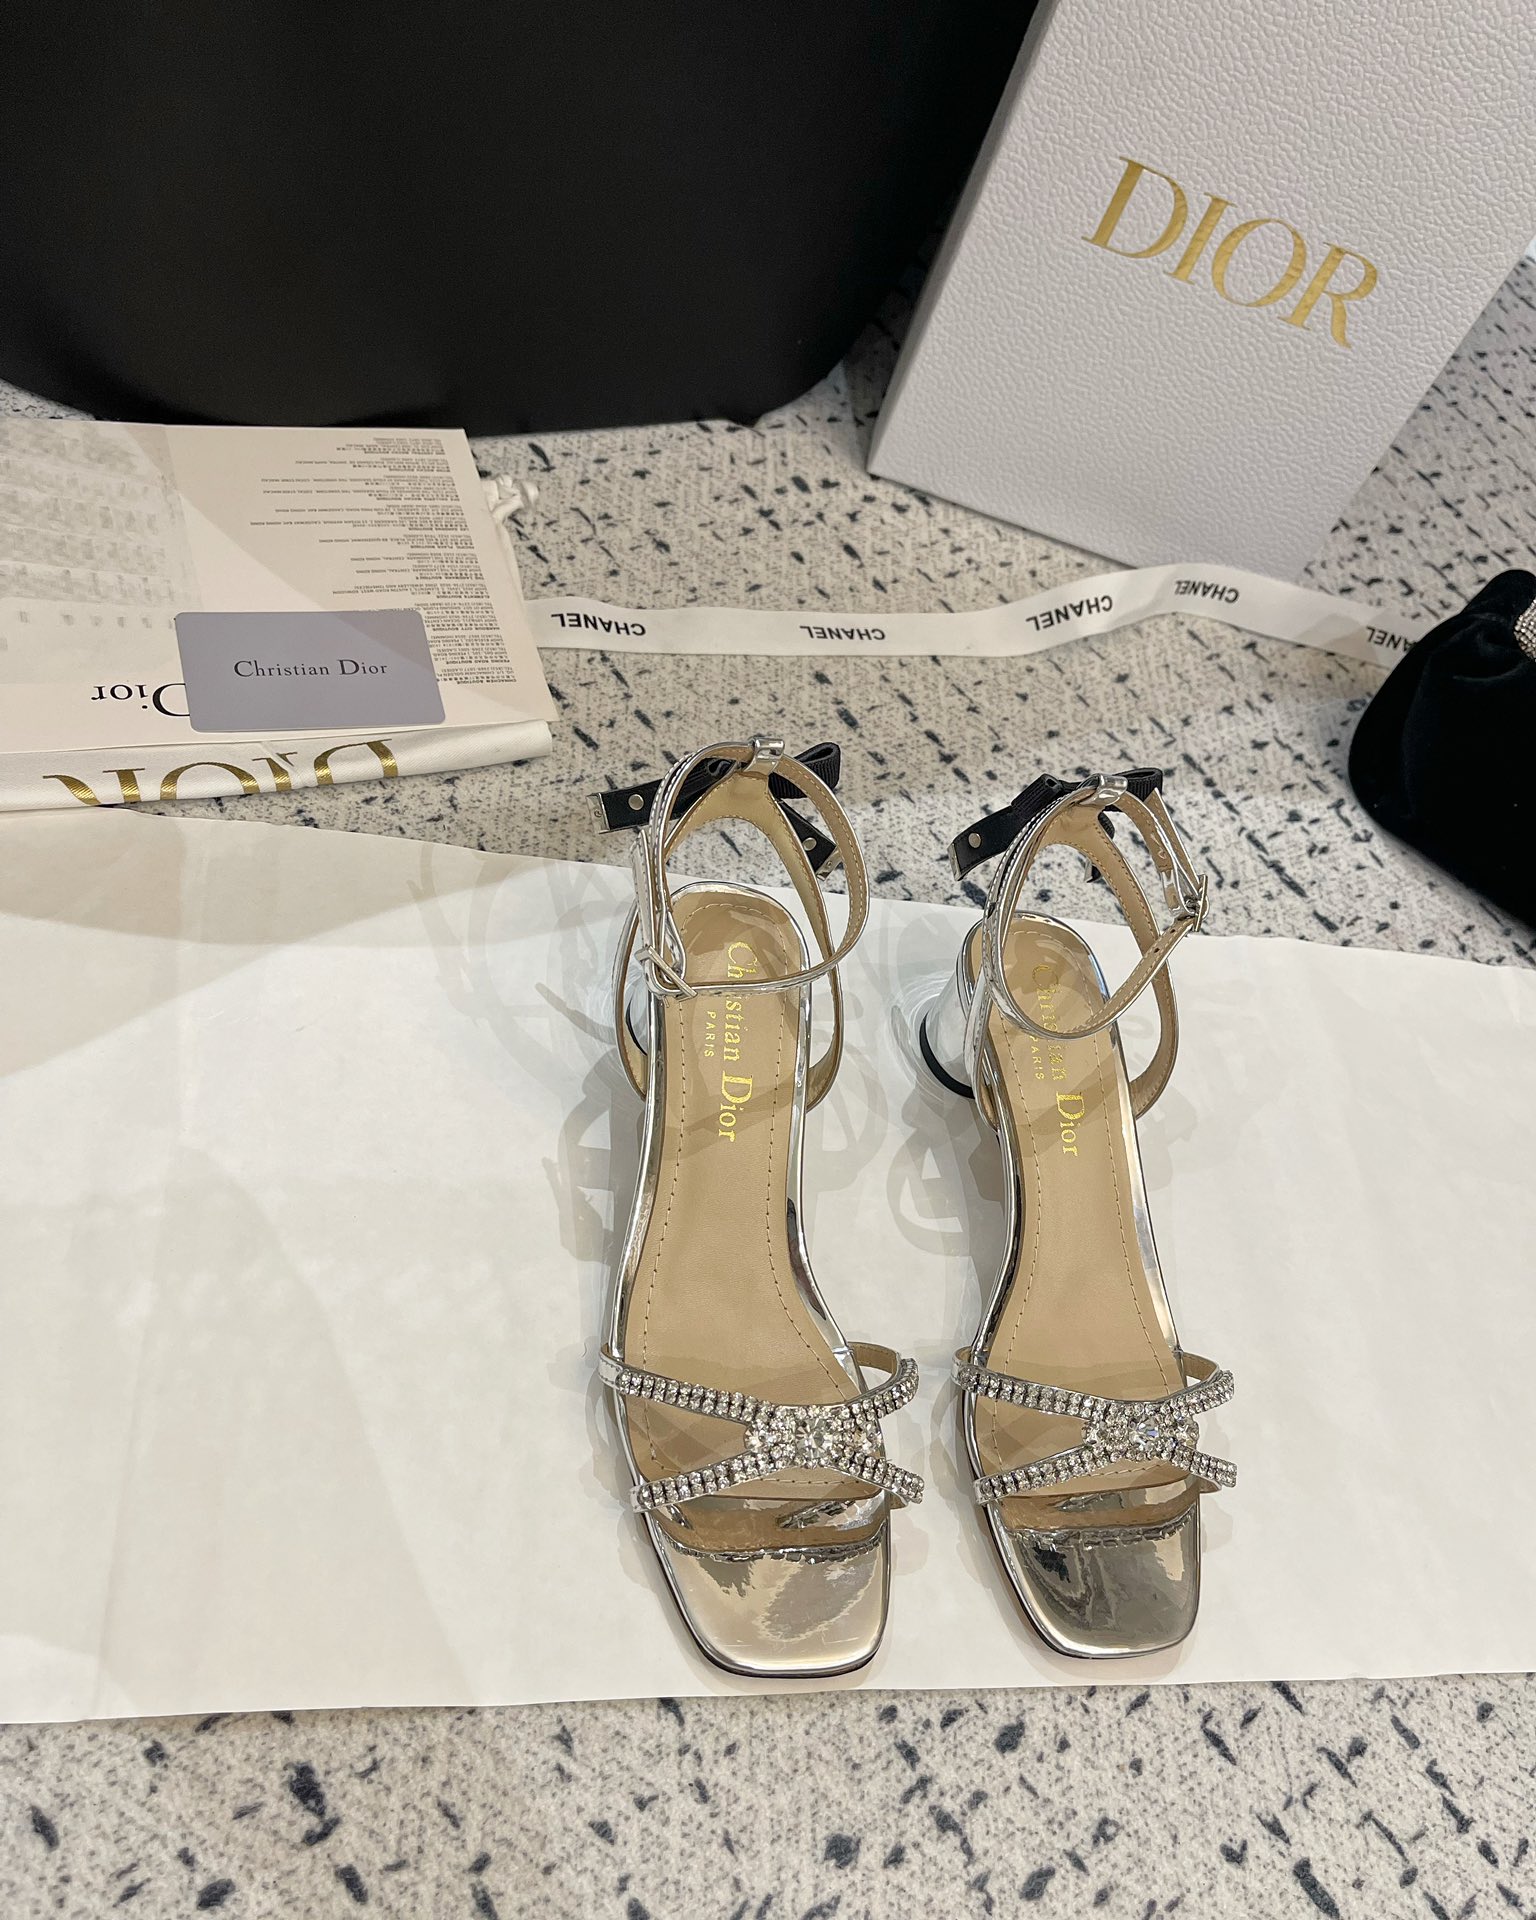 Dior Shoes Sandals Genuine Leather Sheepskin Summer Collection Fashion